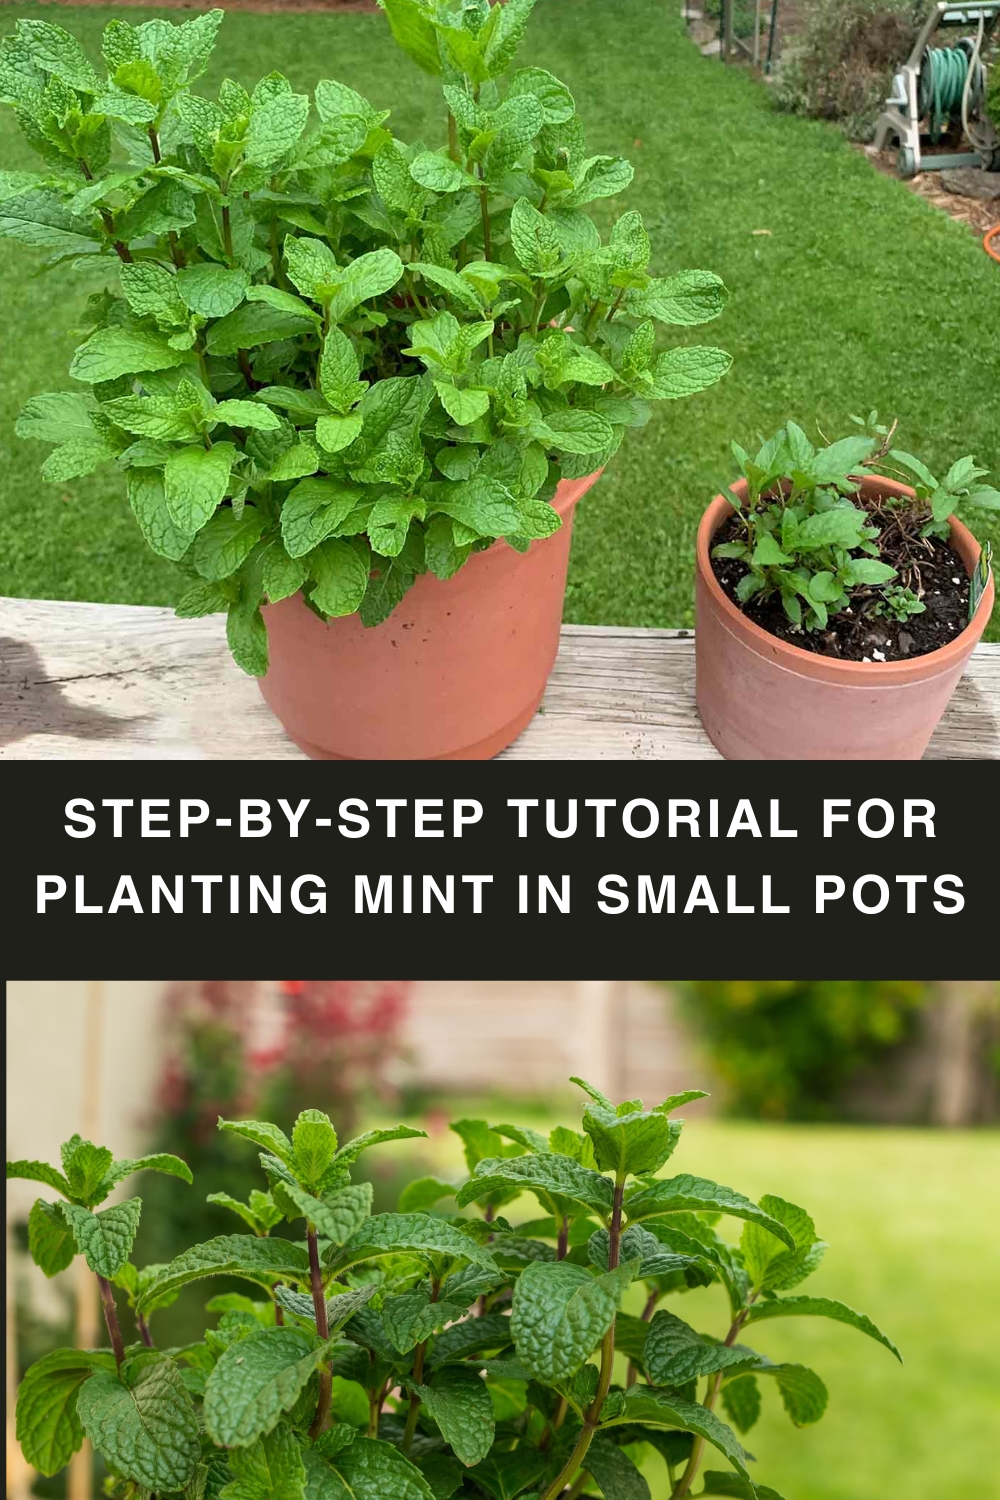 Step-by-Step Tutorial for Planting Mint in Small Pots
